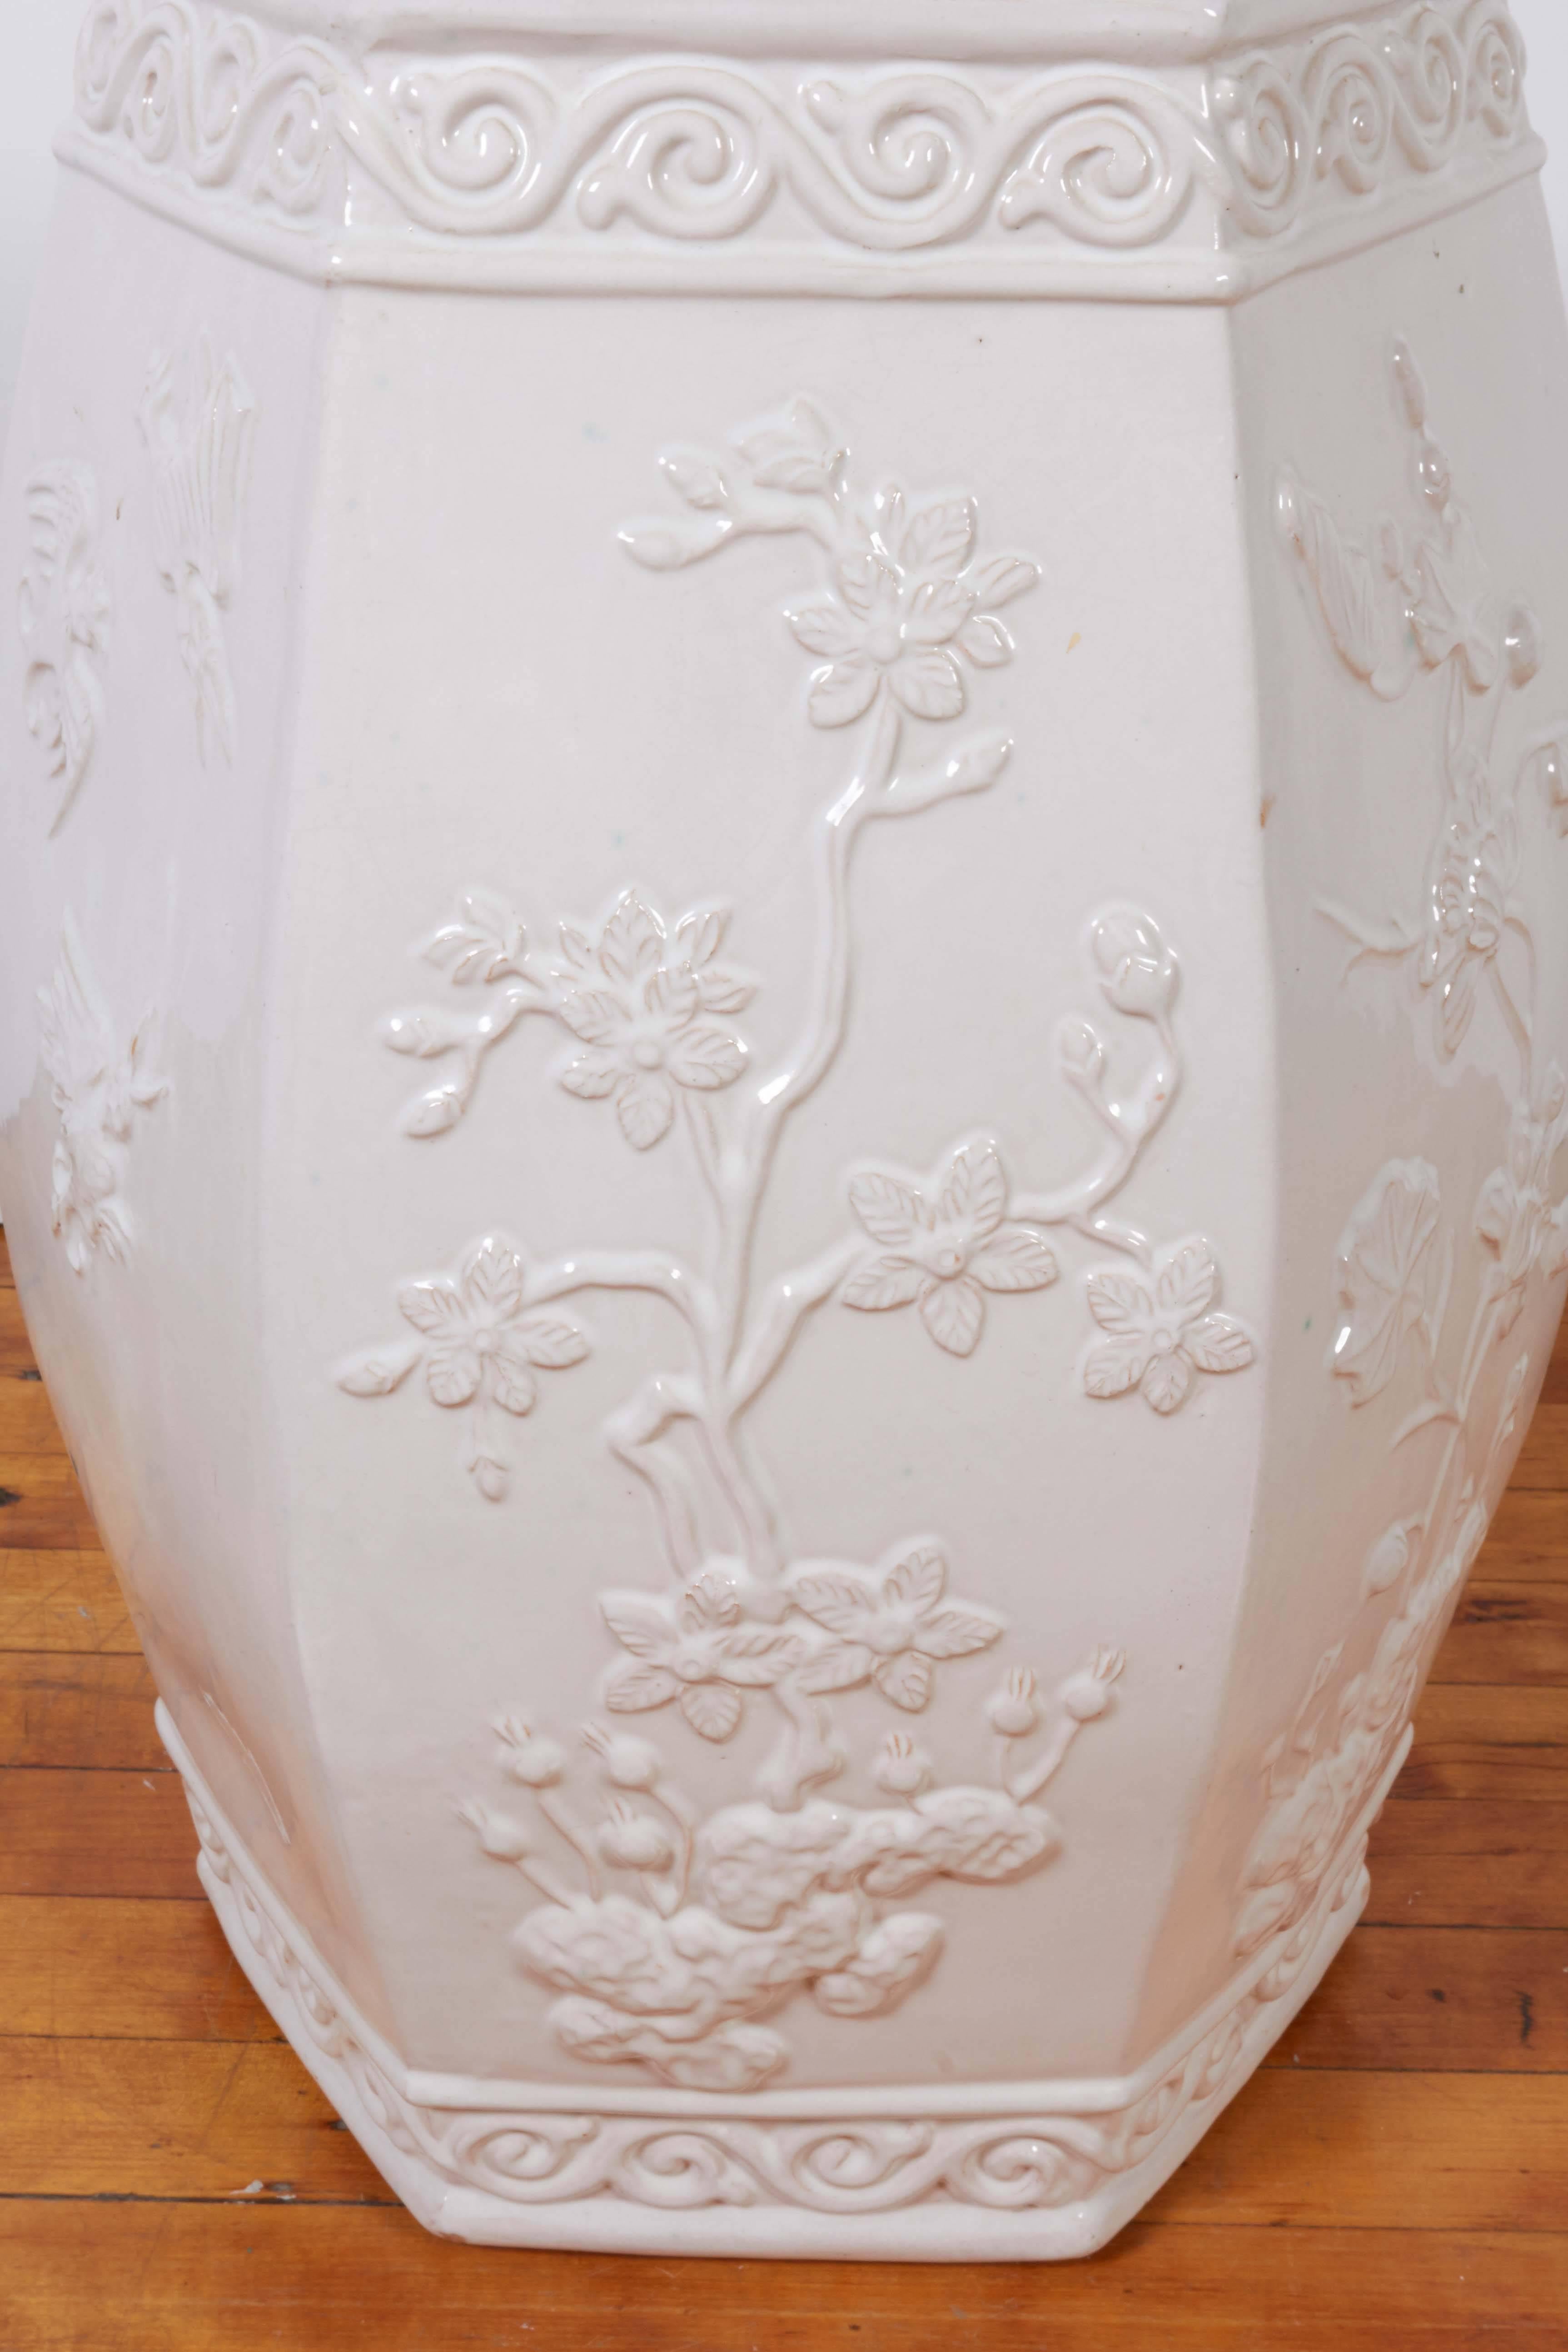 An Italian 1970s hexagonal sided garden seat influenced by the Chinoiserie style and form, detailed with flowering branches in relief, scroll patterned bands to the top and base. Markings include [S. 6181/ Italy] signed to underside. Very good